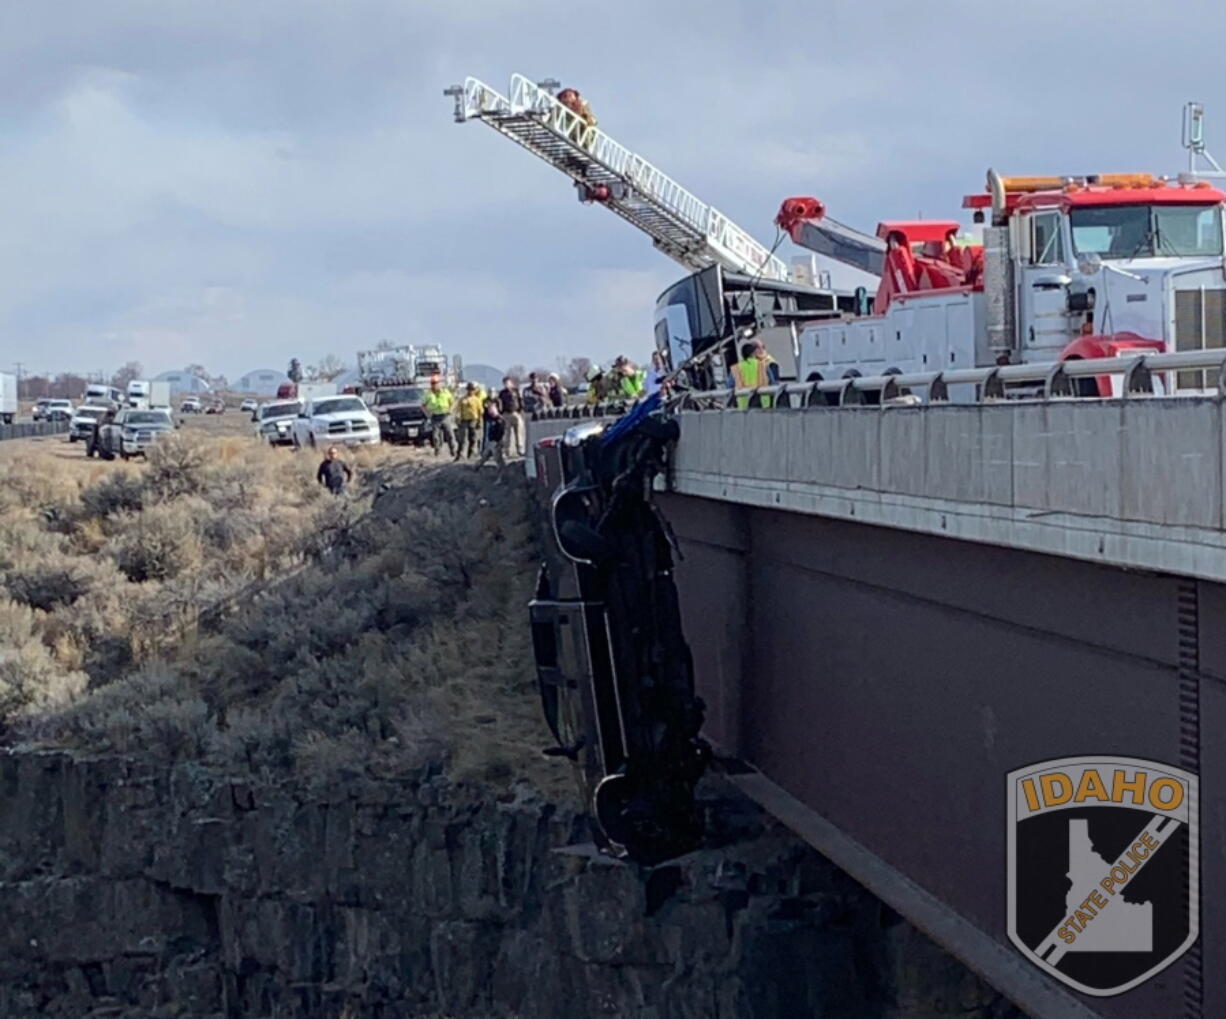 This image provided by the Idaho State Police shows the scene where authorities say a set of camp trailer safety chains and quick, careful work by emergency crews saved two people after their pickup truck plunged off a bridge, leaving them dangling above a deep gorge in southern Idaho on Monday, March 15, 2021.